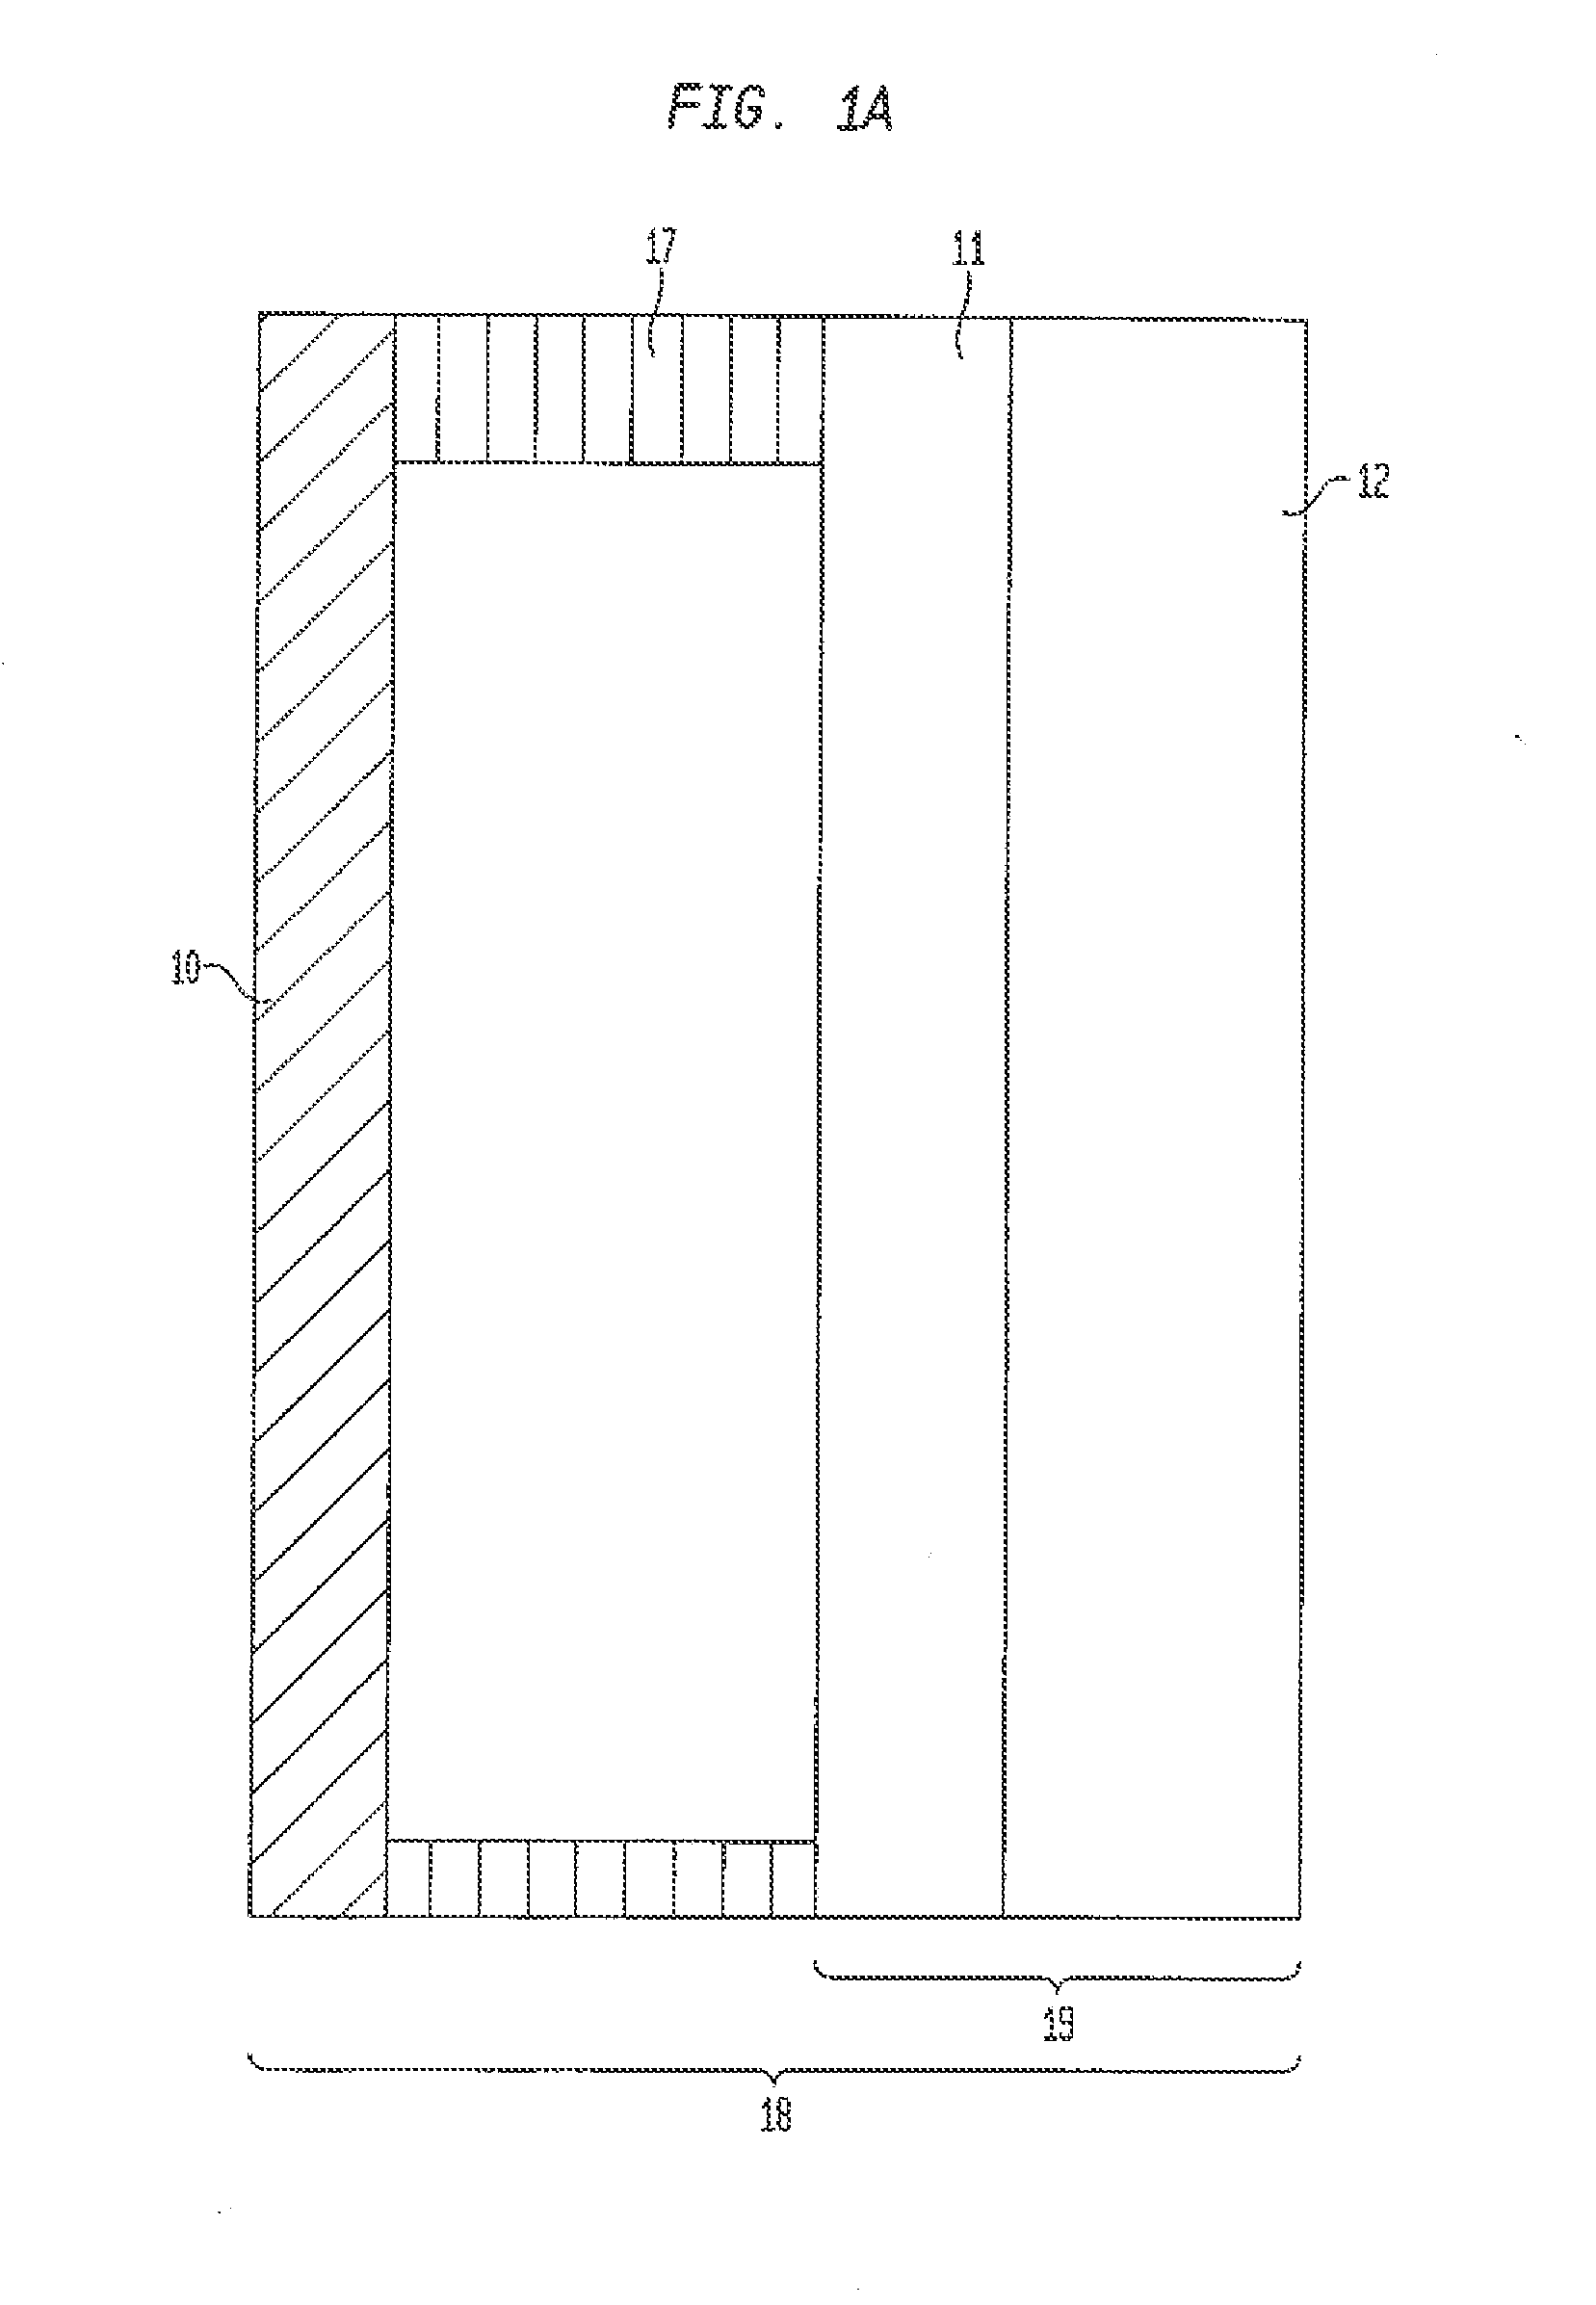 Lamination of electrochromic device to glass substrates